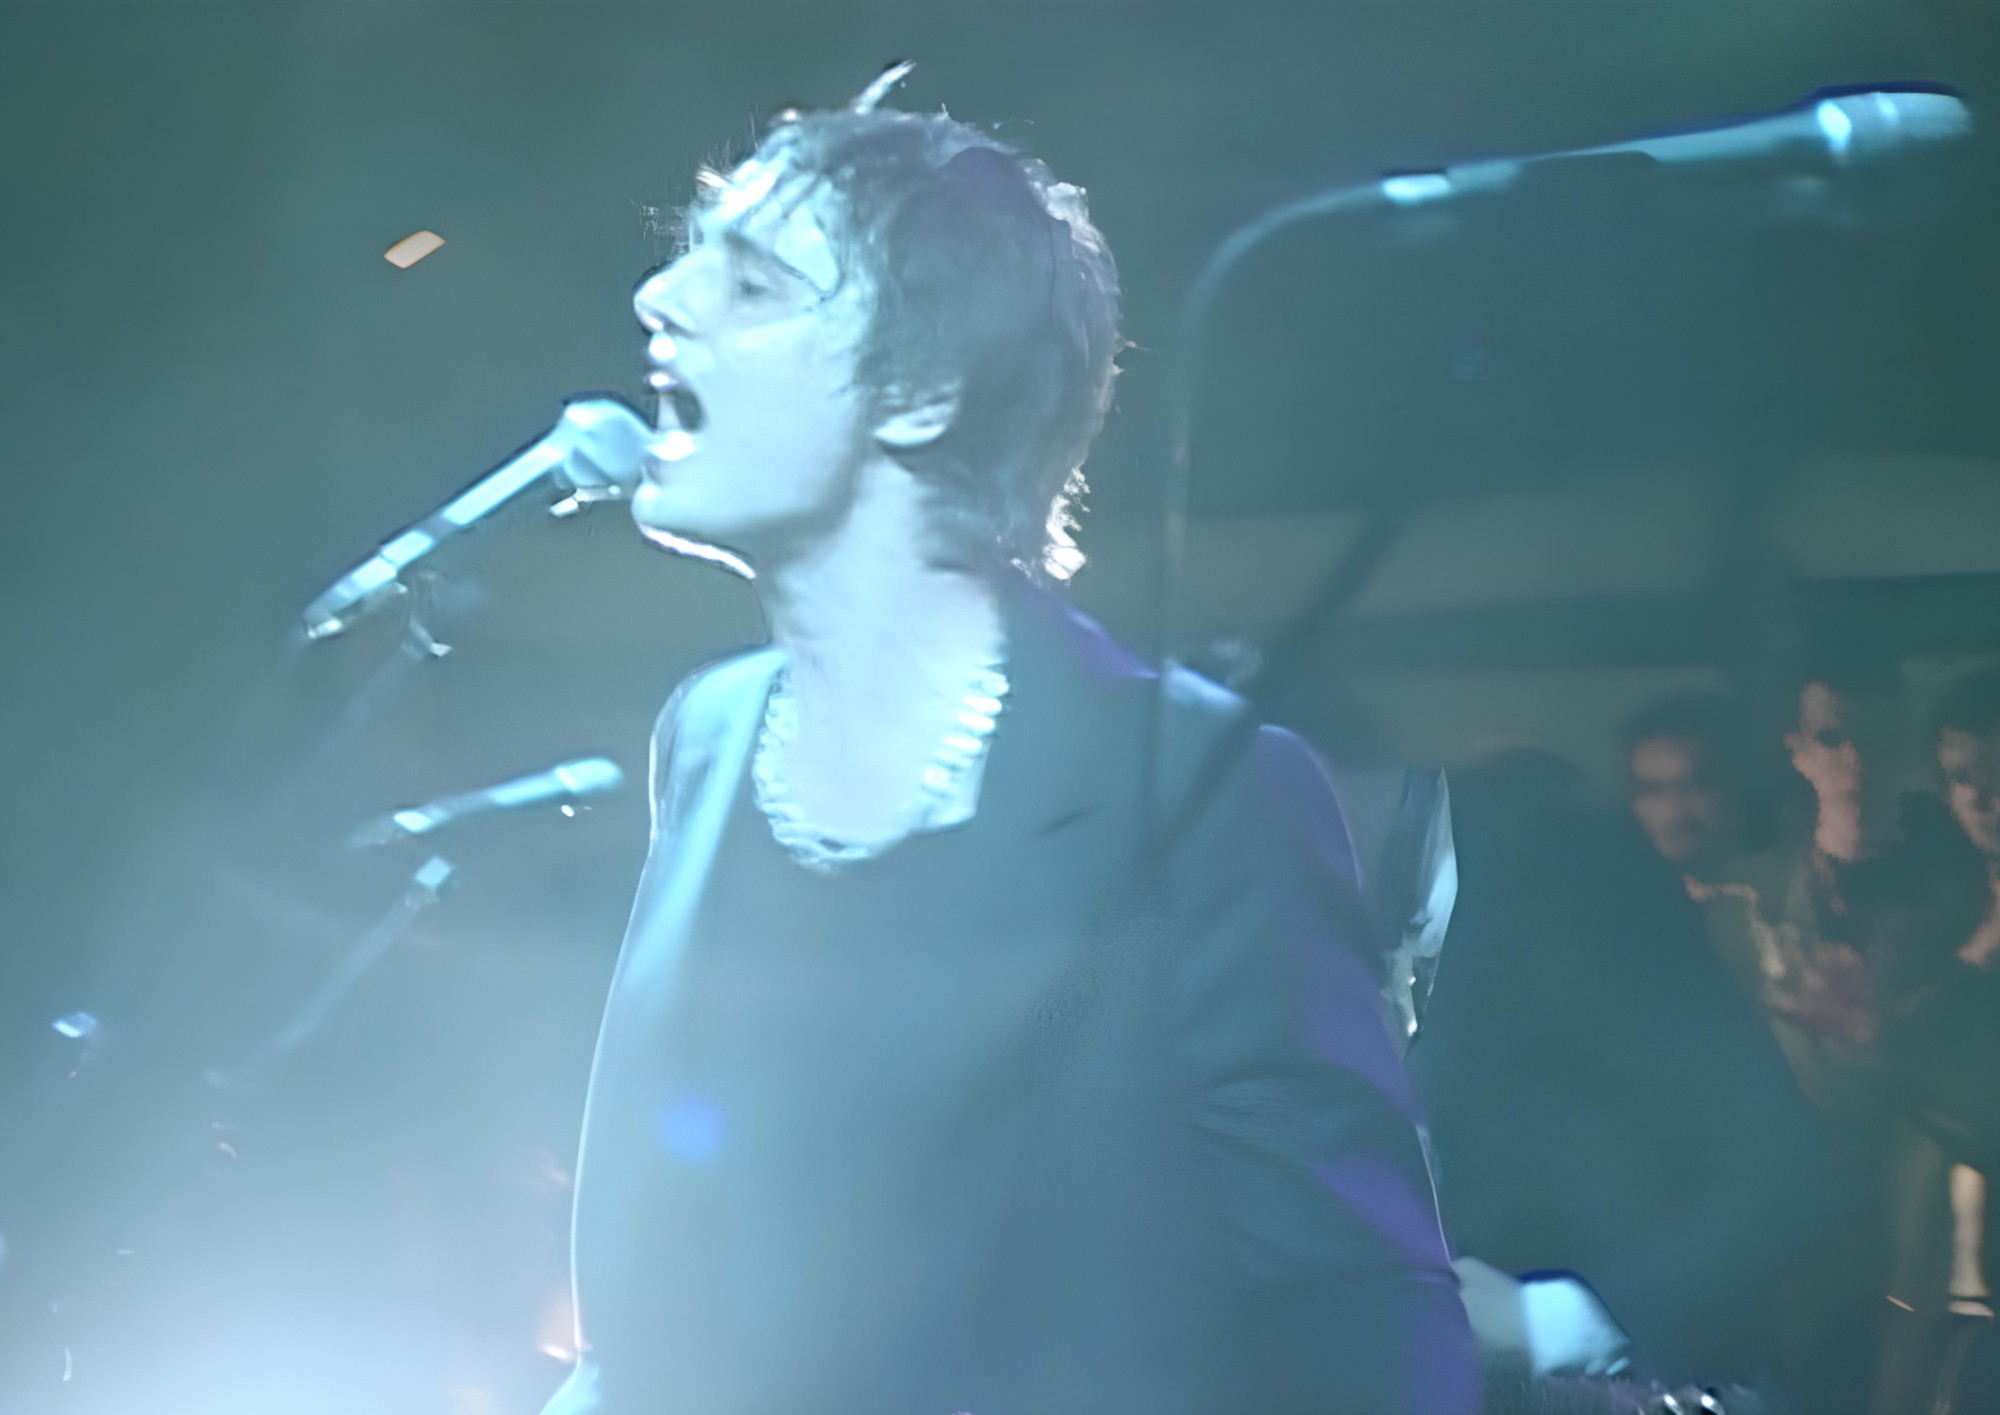 Image of Pete Doherty from the documentary Stranger in My Own Skin